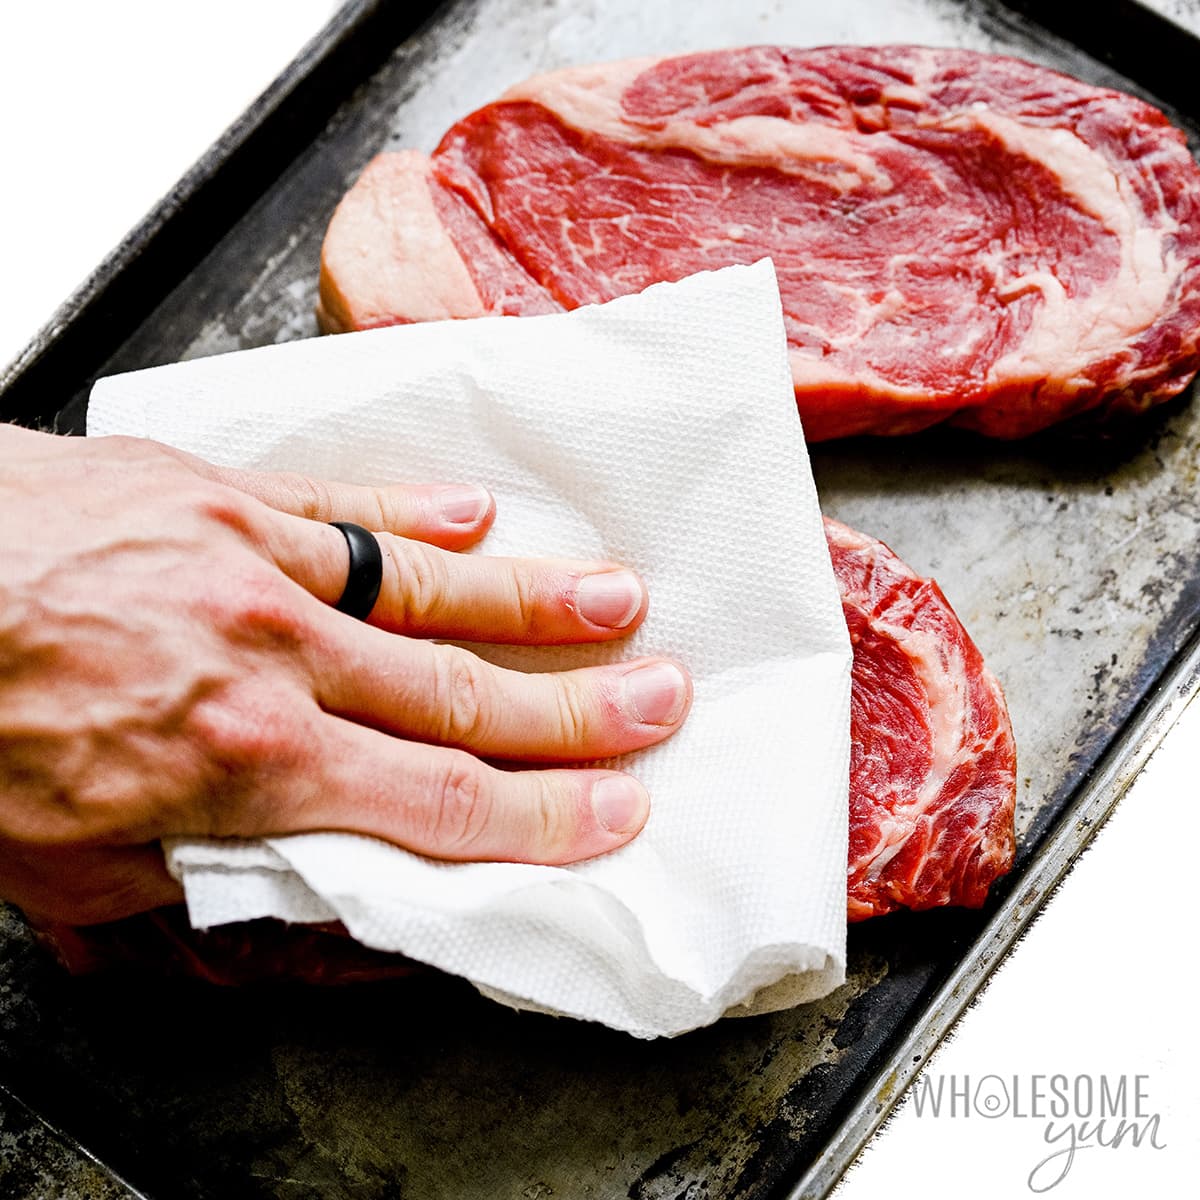 Raw steak being patted dry with paper towel.